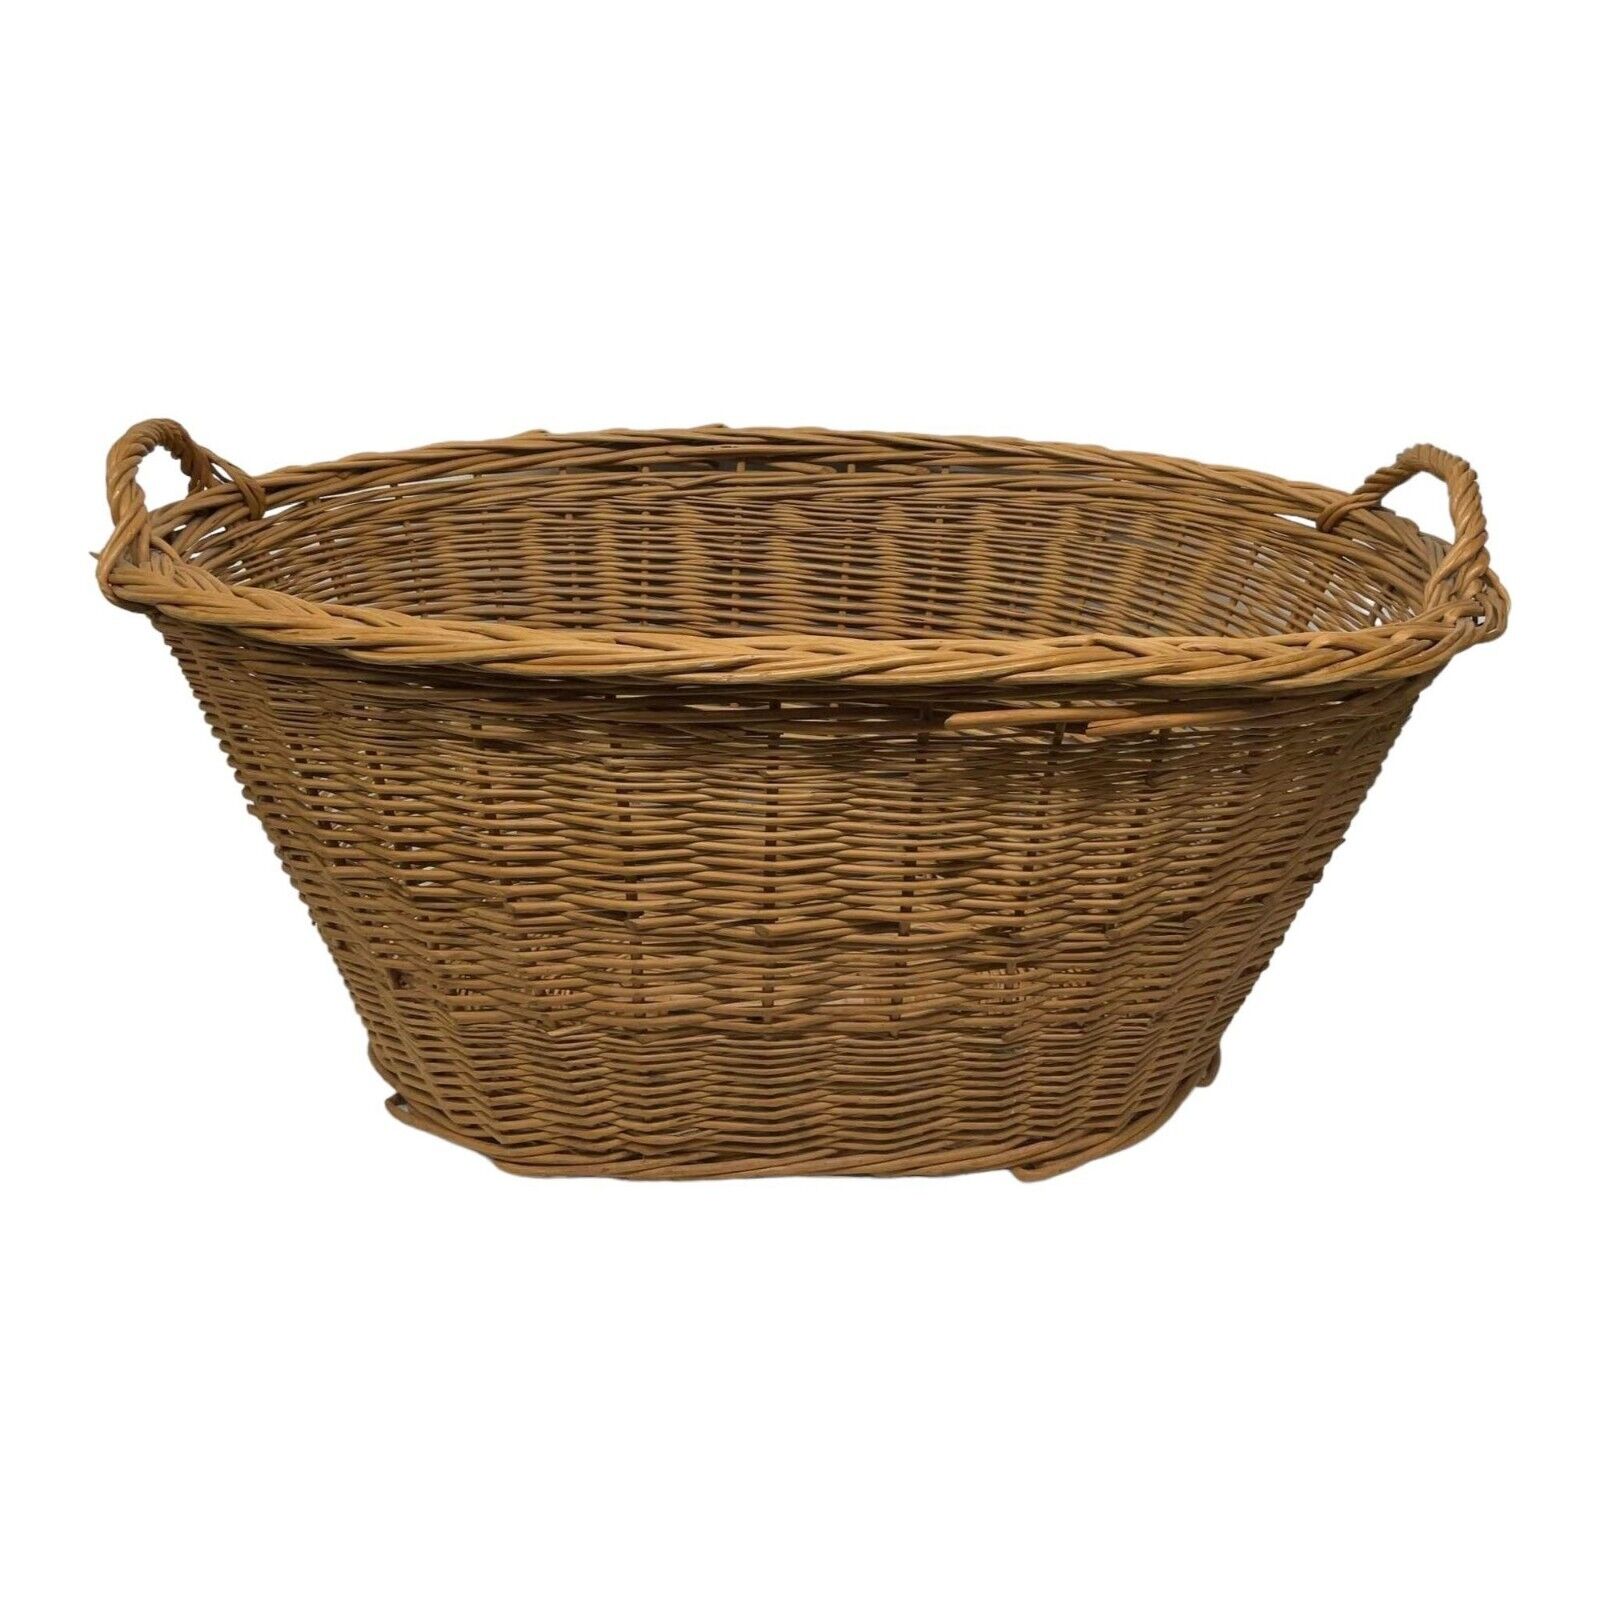 French Wicker Laundry Storage Basket Oval with Handles Country Farmhouse Decor